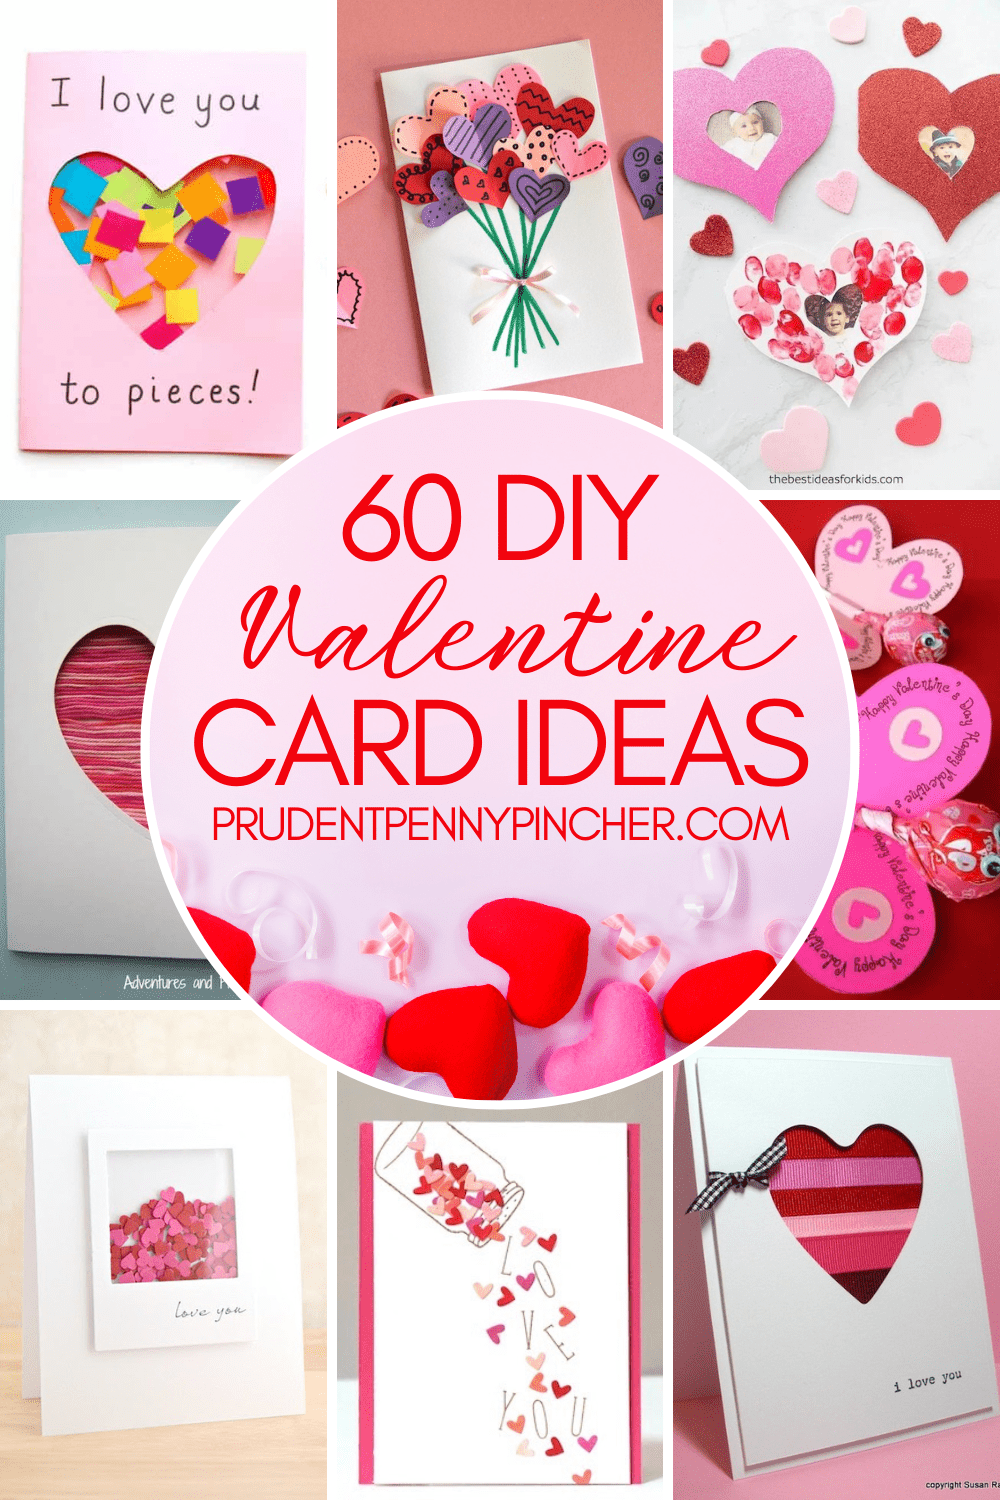 Make These Heart Cards - Create With Sue